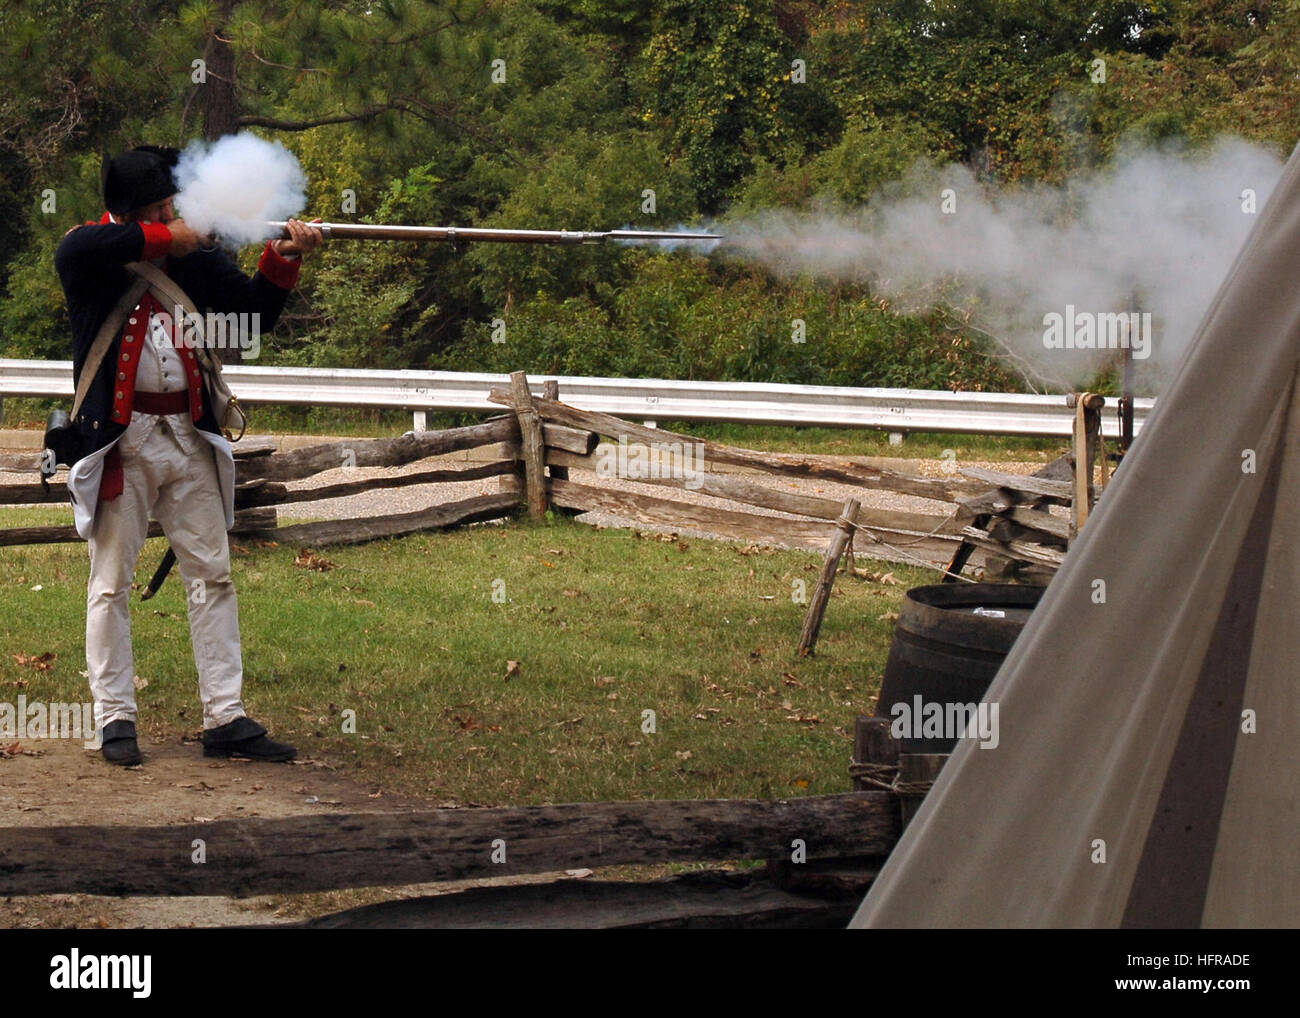 061019-N-4821D-693 Yorktown, Va. (Oct. 19, 2006) - Retired Chief Aviation Structural Mechanic Don Reimert, a historical interpreter, fires a flintlock musket during a demonstration. The event was held as part of the 225th anniversary of the Revolutionary War Yorktown Victory Celebration. U.S. Navy photo by Mass Communication Specialist 2nd Class Christopher Delano (RELEASED) US Navy 061019-N-4821D-693 Retired Chief Aviation Structural Mechanic Don Reimert, a historical interpreter, fires a flintlock musket during a demonstration Stock Photo